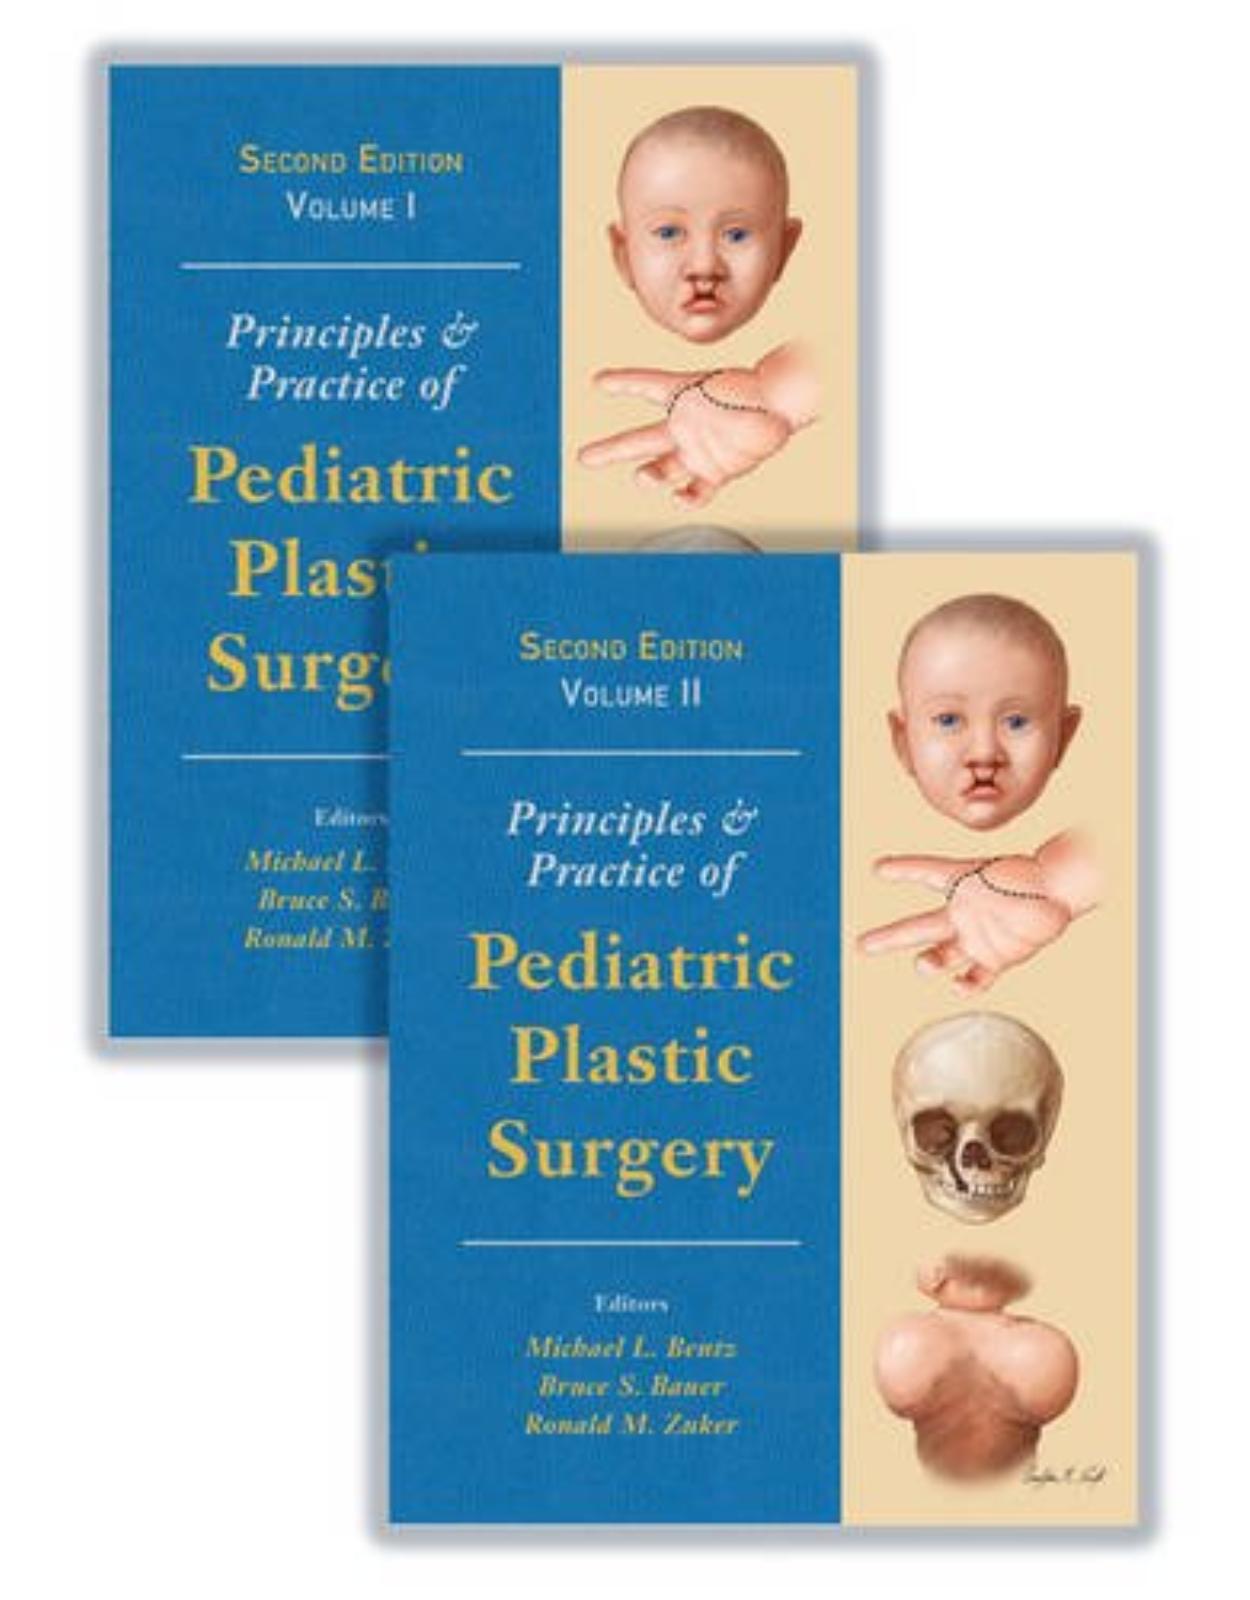 Principles and Practice of Pediatric Plastic Surgery, Second Edition - Two Volume Set